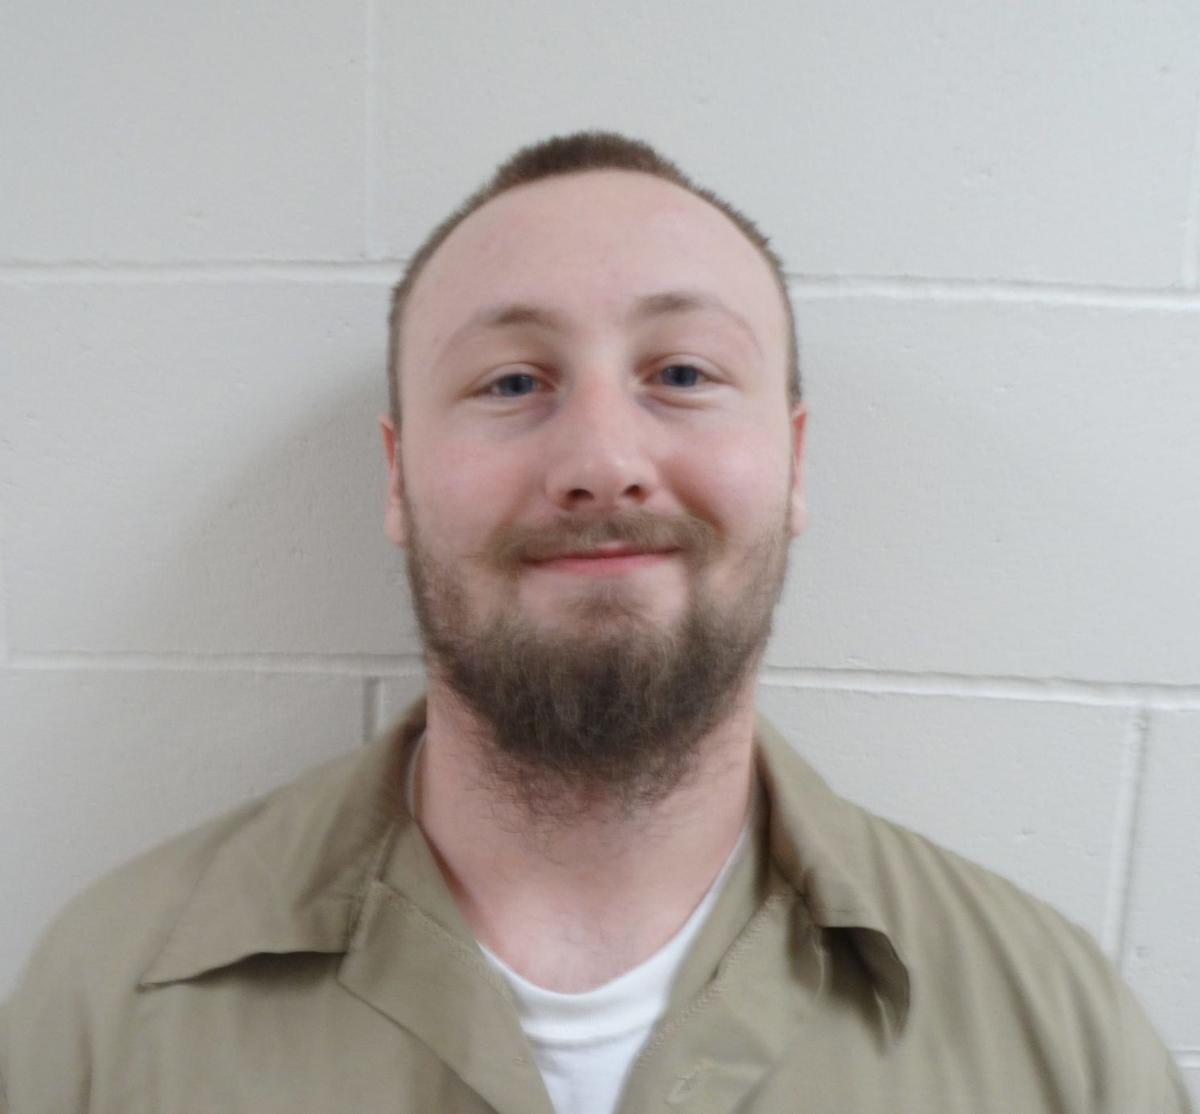 Inmates from Dawson County escaped from Community Corrections Center in